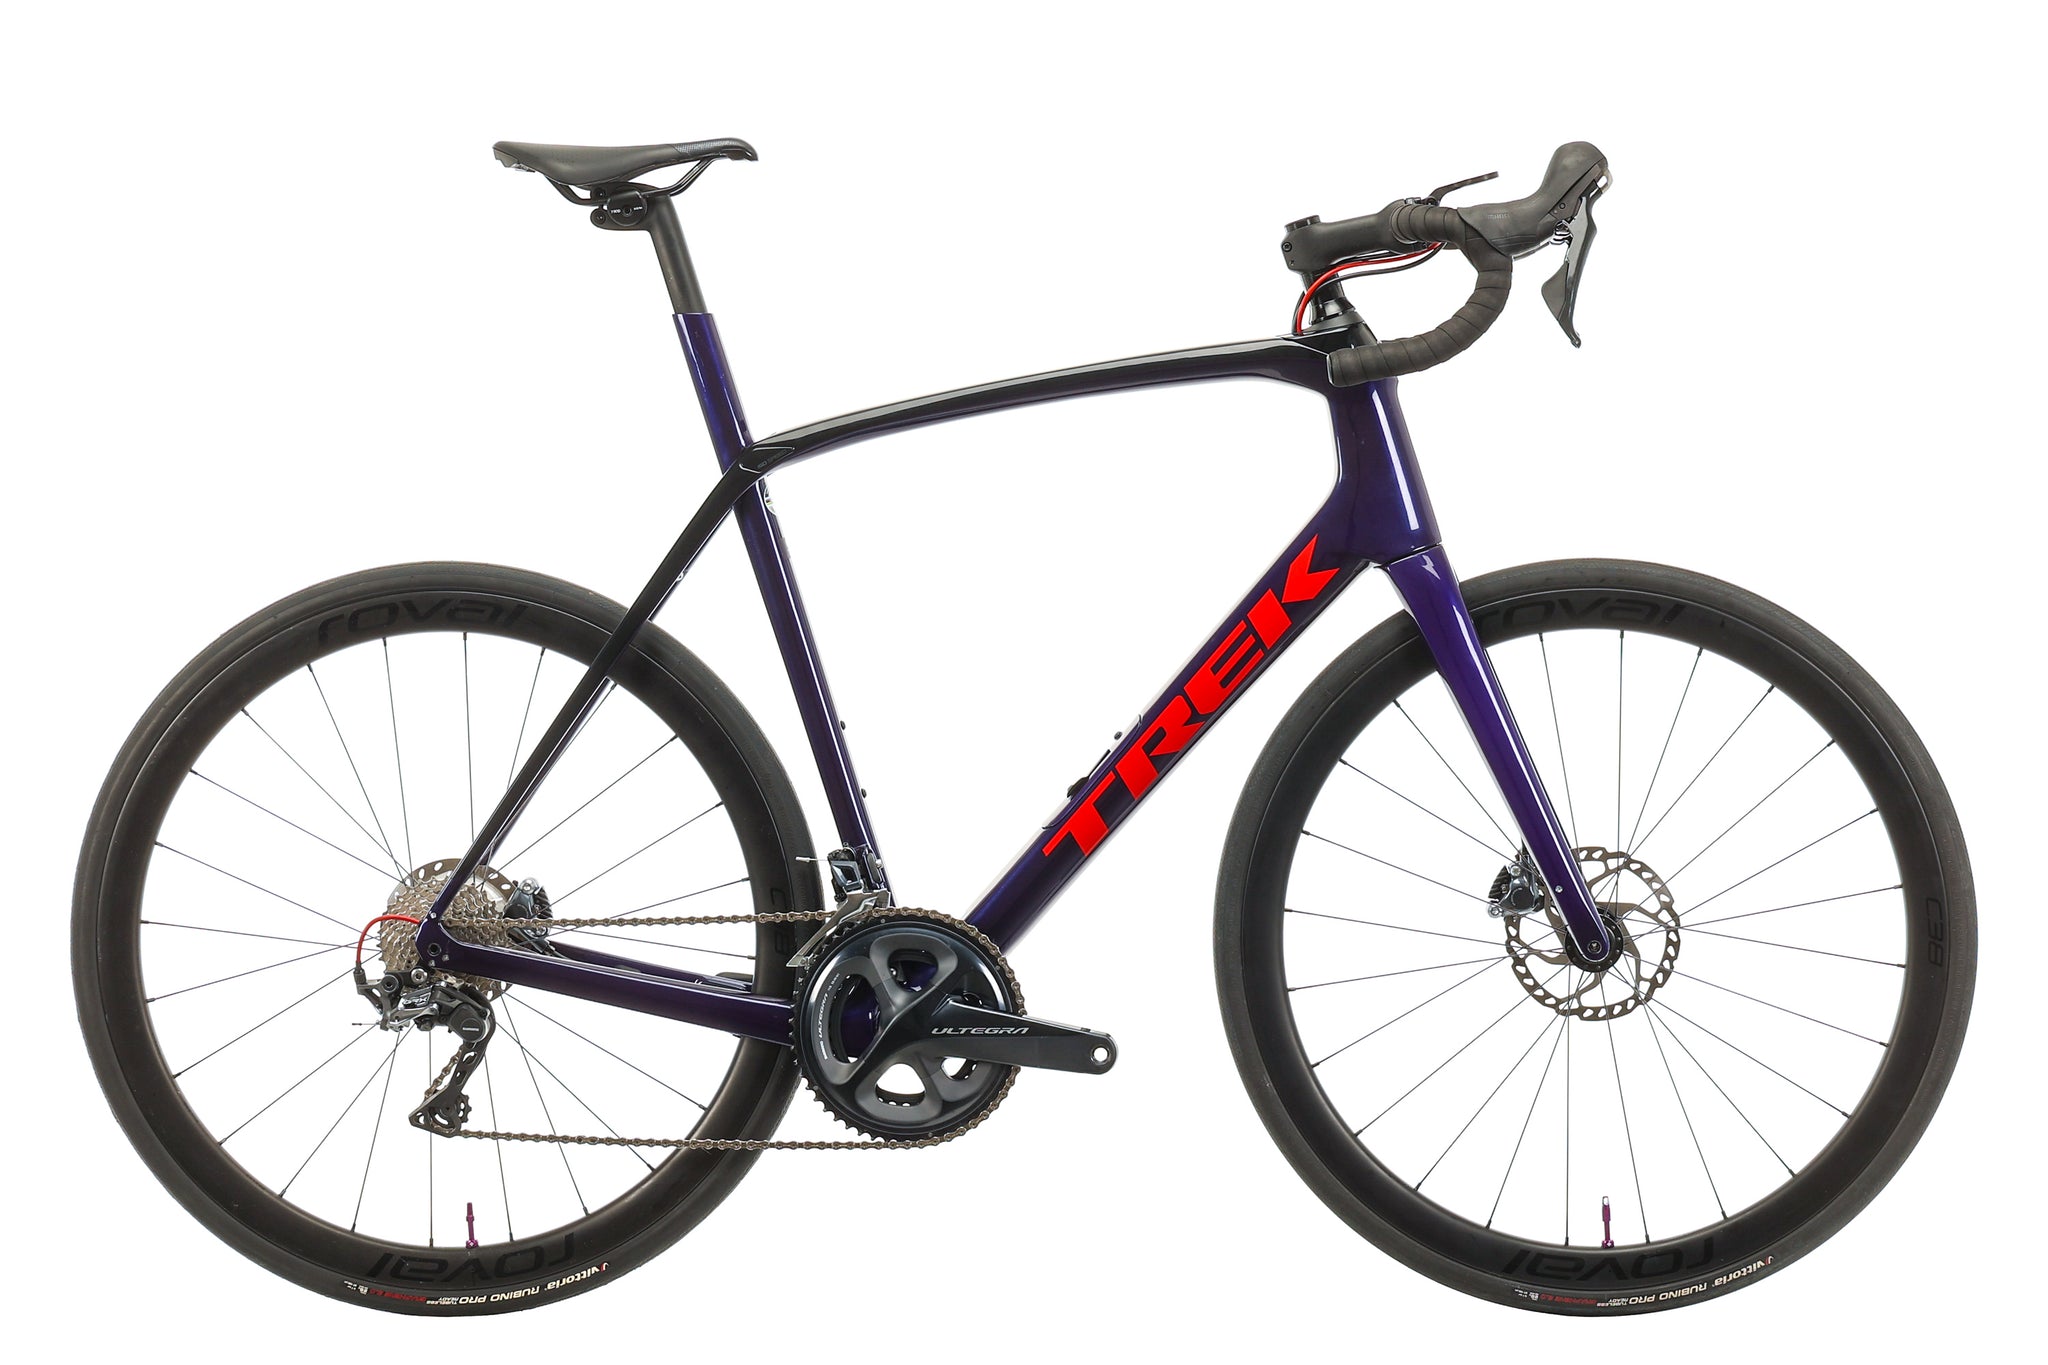 Find Your Bike's Serial Number (For Bike Index or to Sell Your Bike)